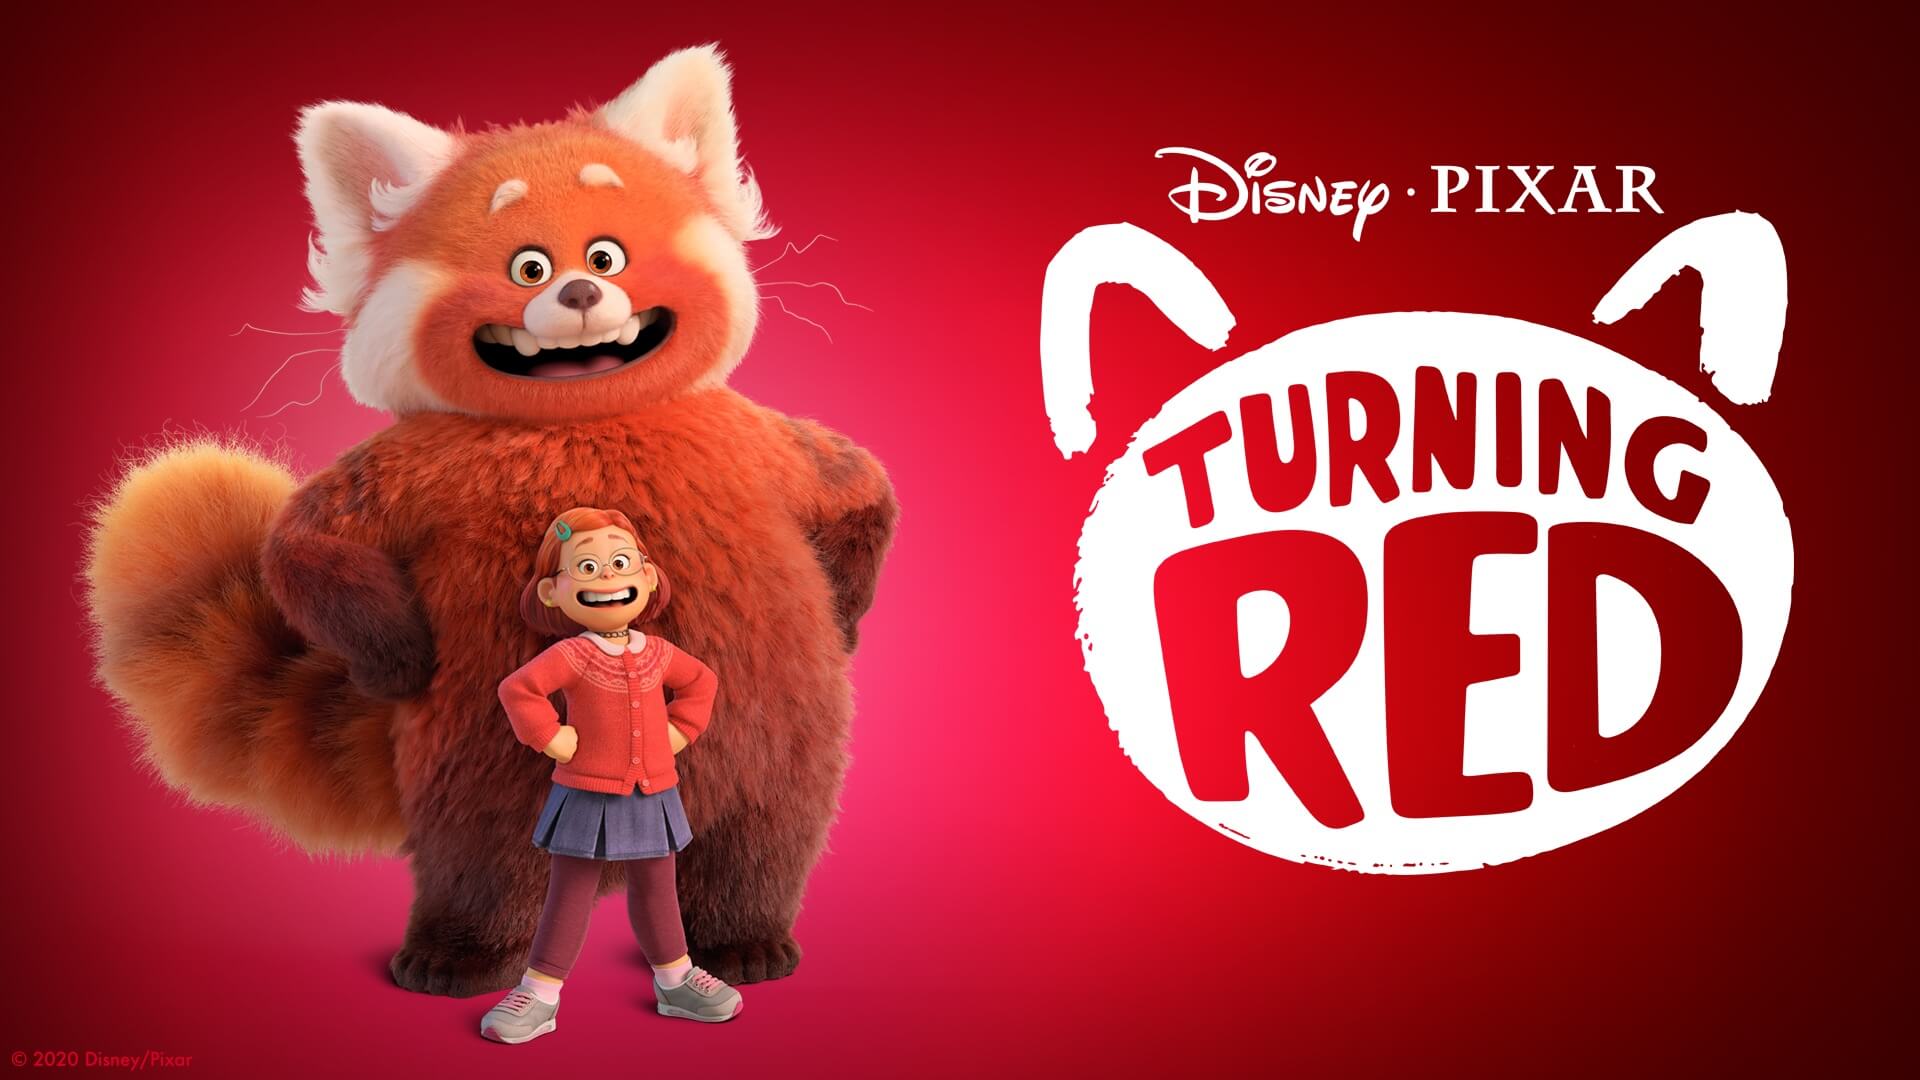 Exclusive Trailers for Pixar's 'Turning Red' Are Coming Very Soon